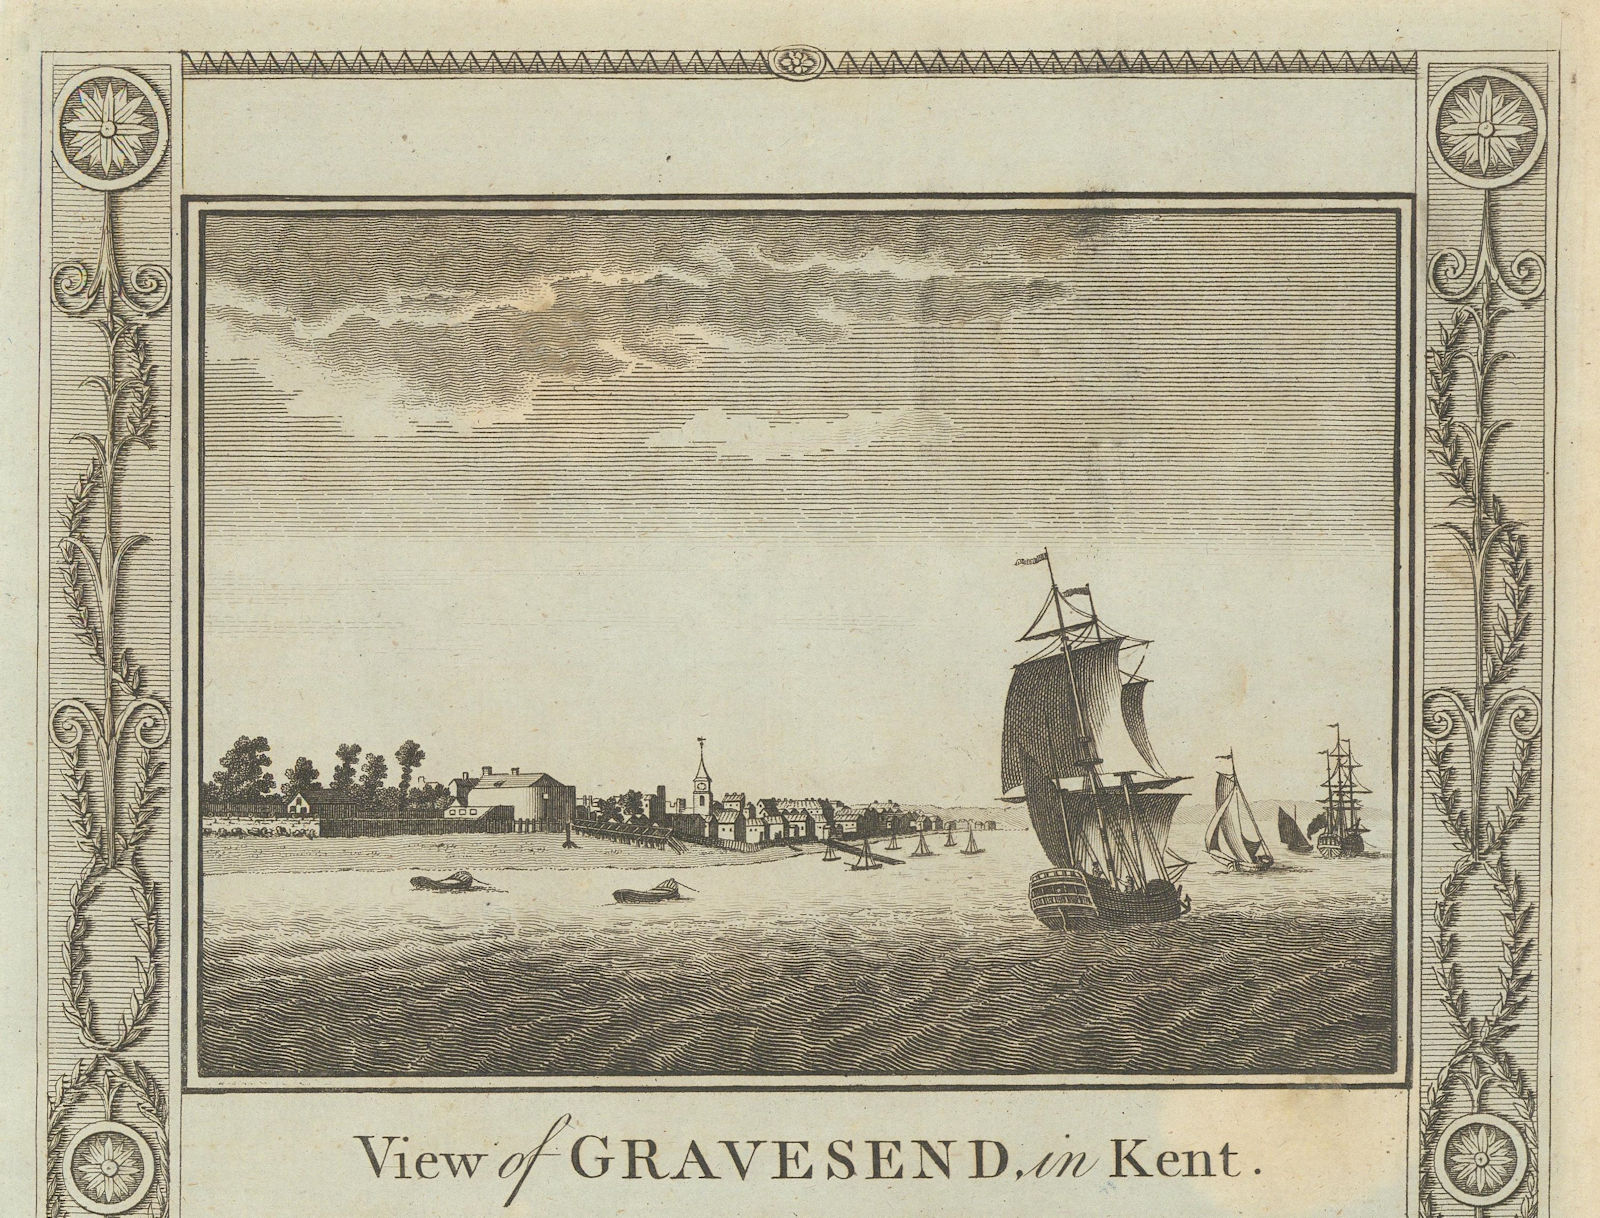 View of Gravesend in Kent. St George's church. Sailing ships. THORNTON 1784